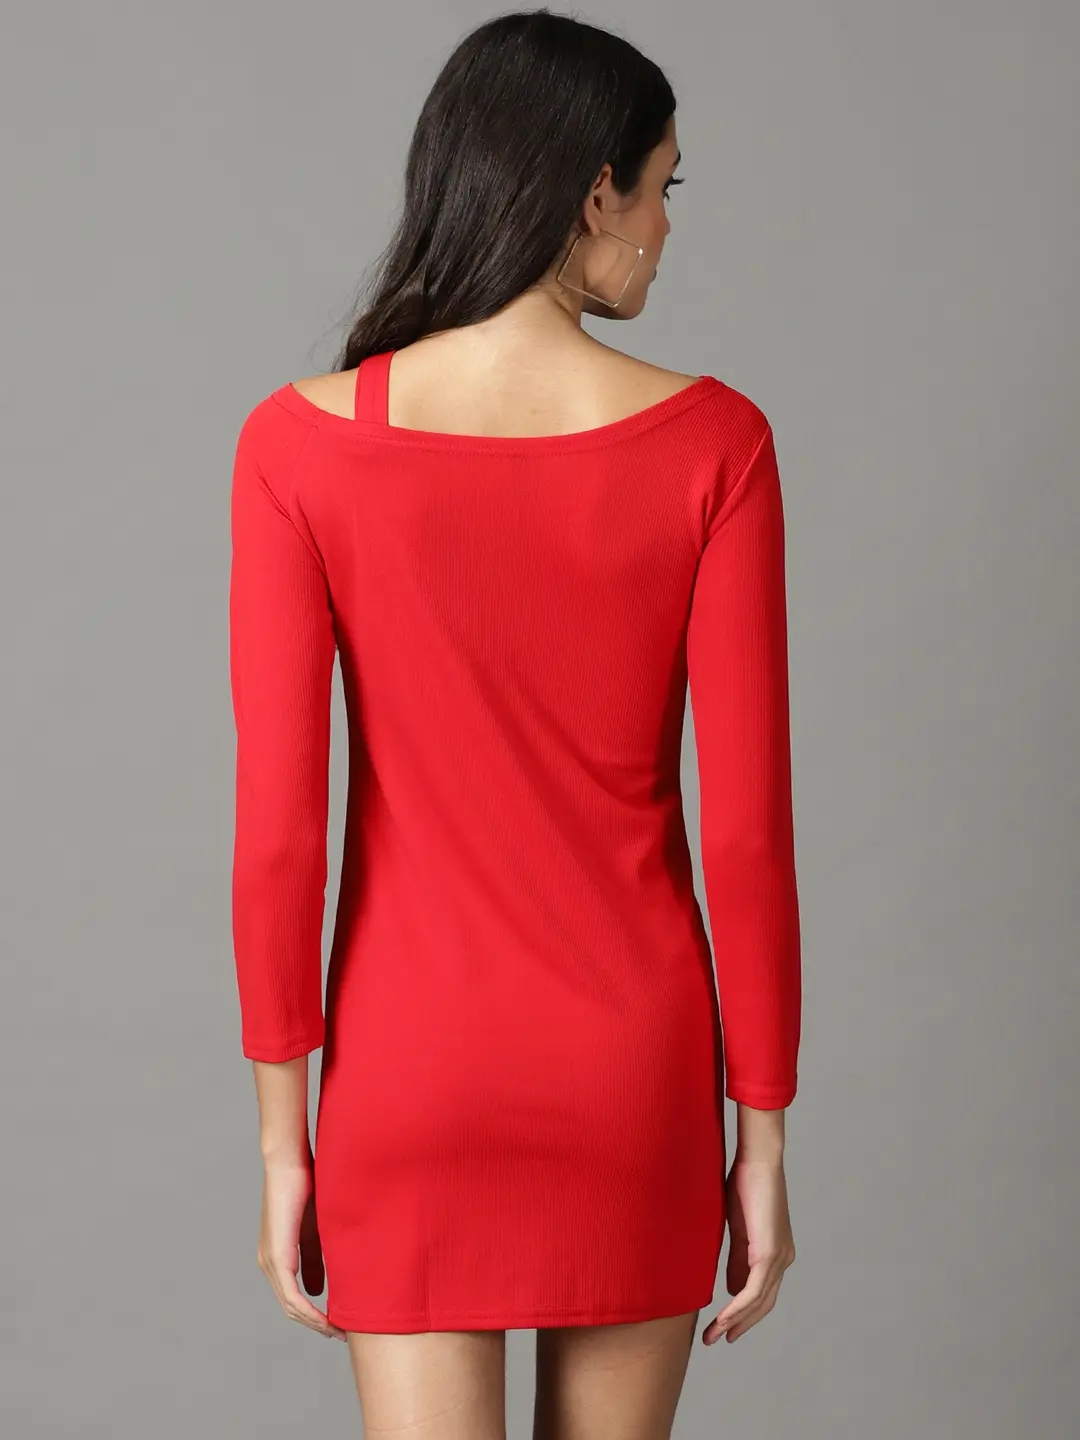 Showoff | SHOWOFF Women Red Solid Asymmetric Neck Full Sleeves Above Knee Bodycon Dress 3